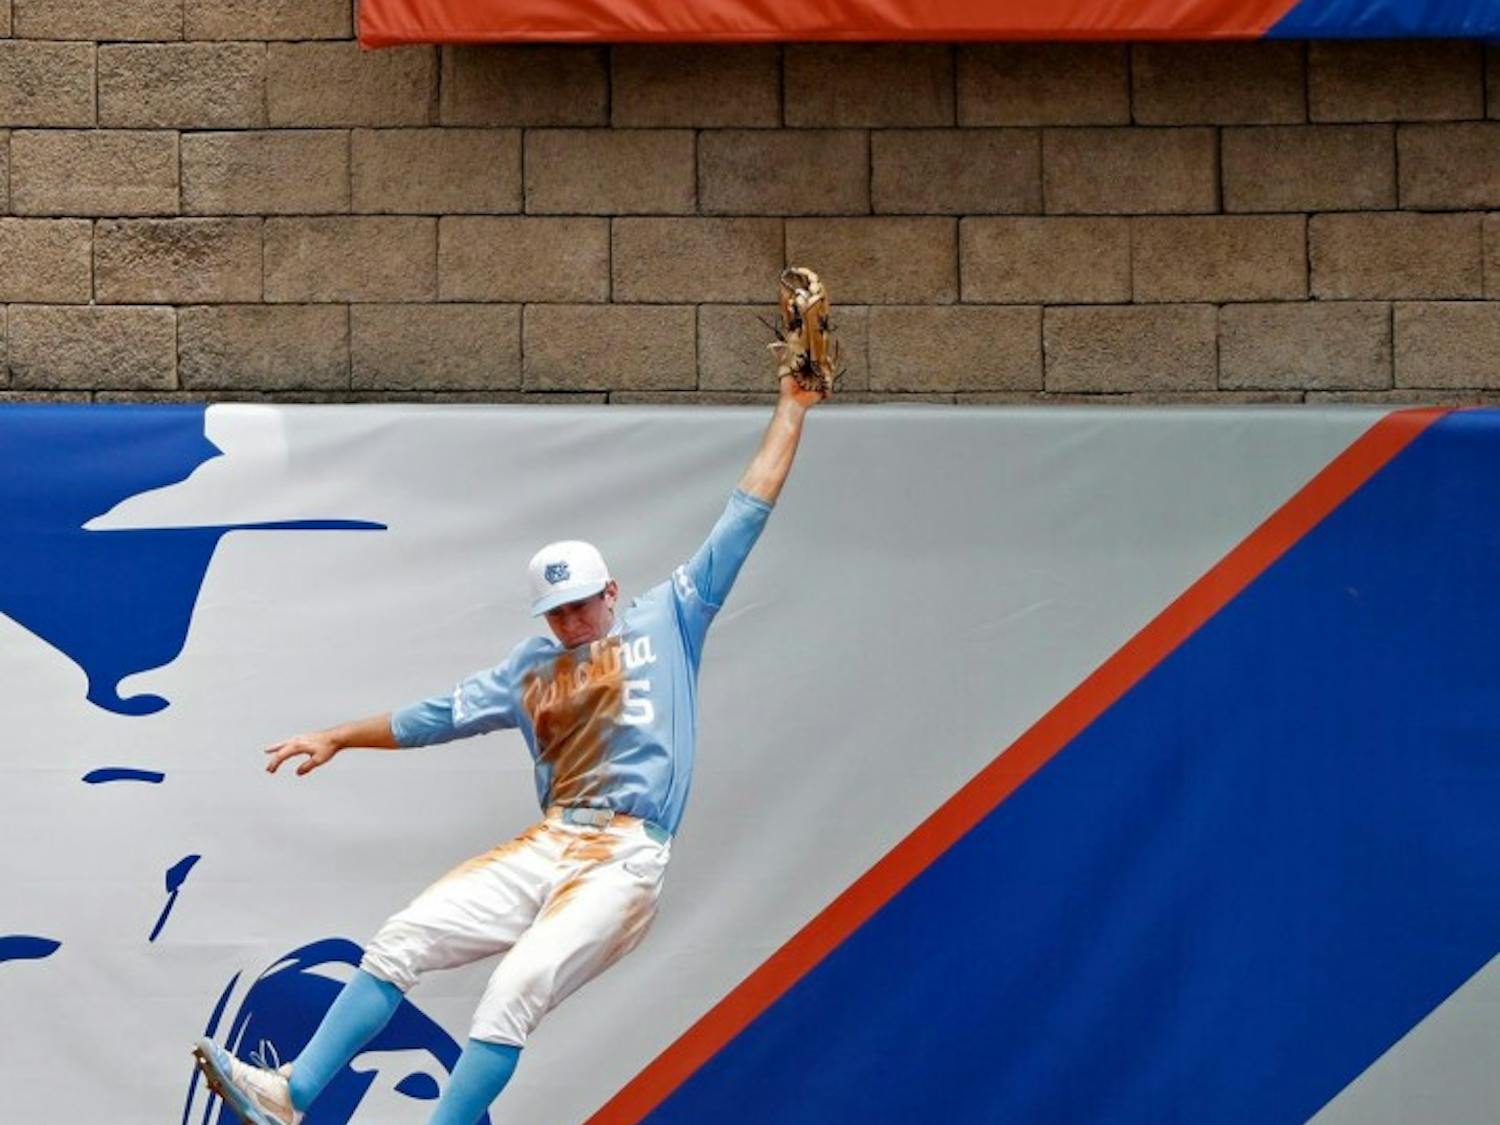 Michael Busch makes a catch against Florida State in the ACC baseball title game on May 28. Photo courtesy of Wade Payne of theACC.com